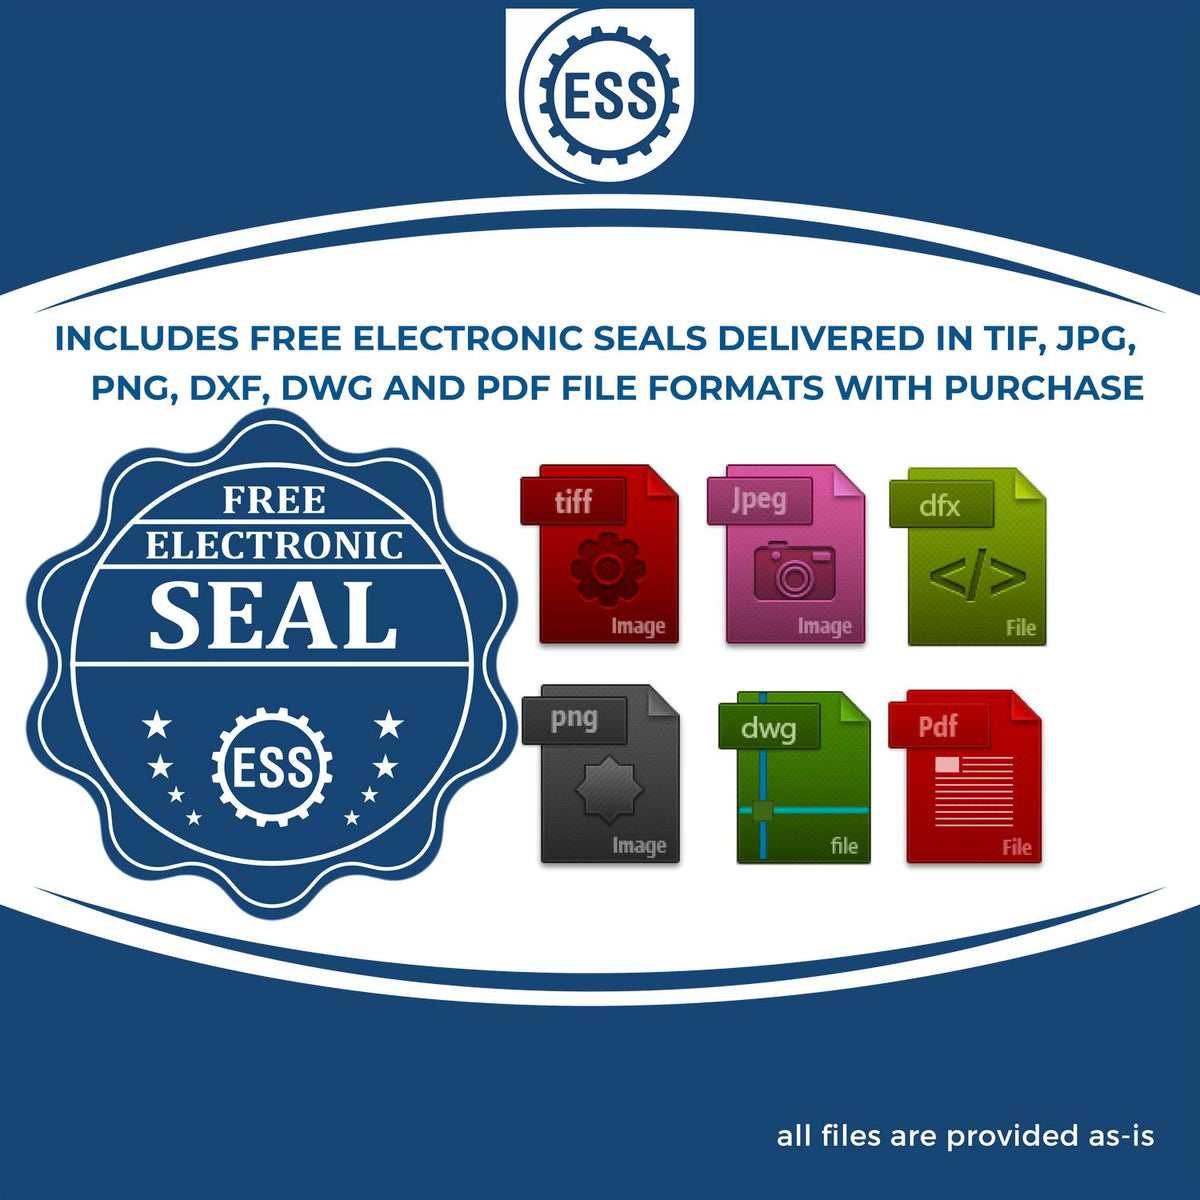 An infographic for the free electronic seal for the Soft Indiana Professional Engineer Seal illustrating the different file type icons such as DXF, DWG, TIF, JPG and PNG.